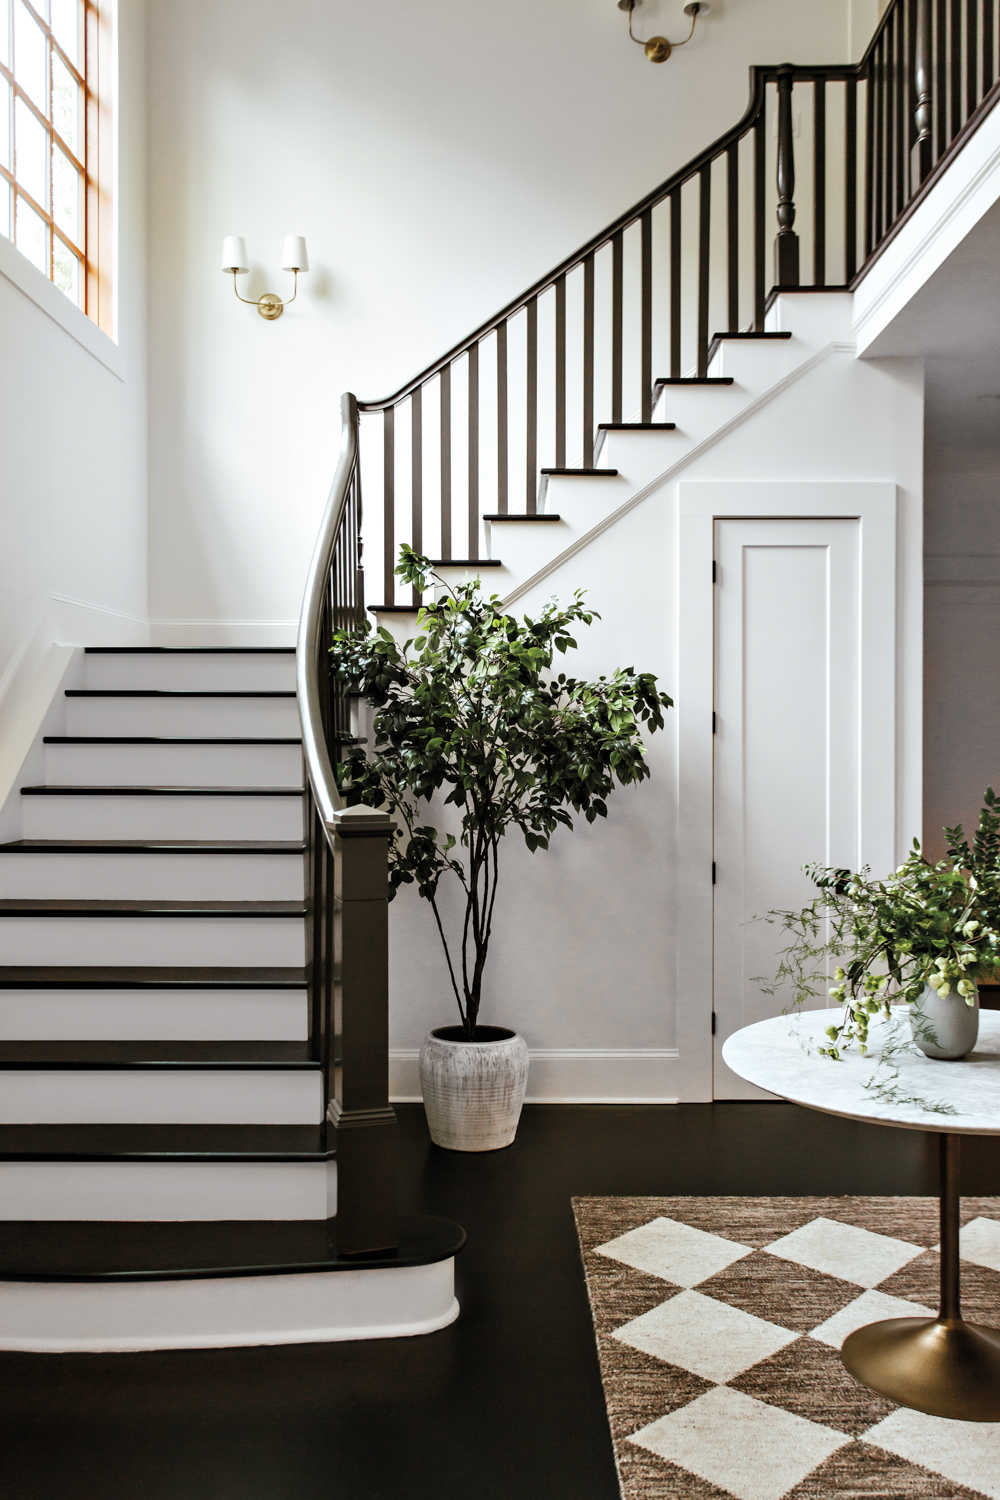 Entry stair hall with white...